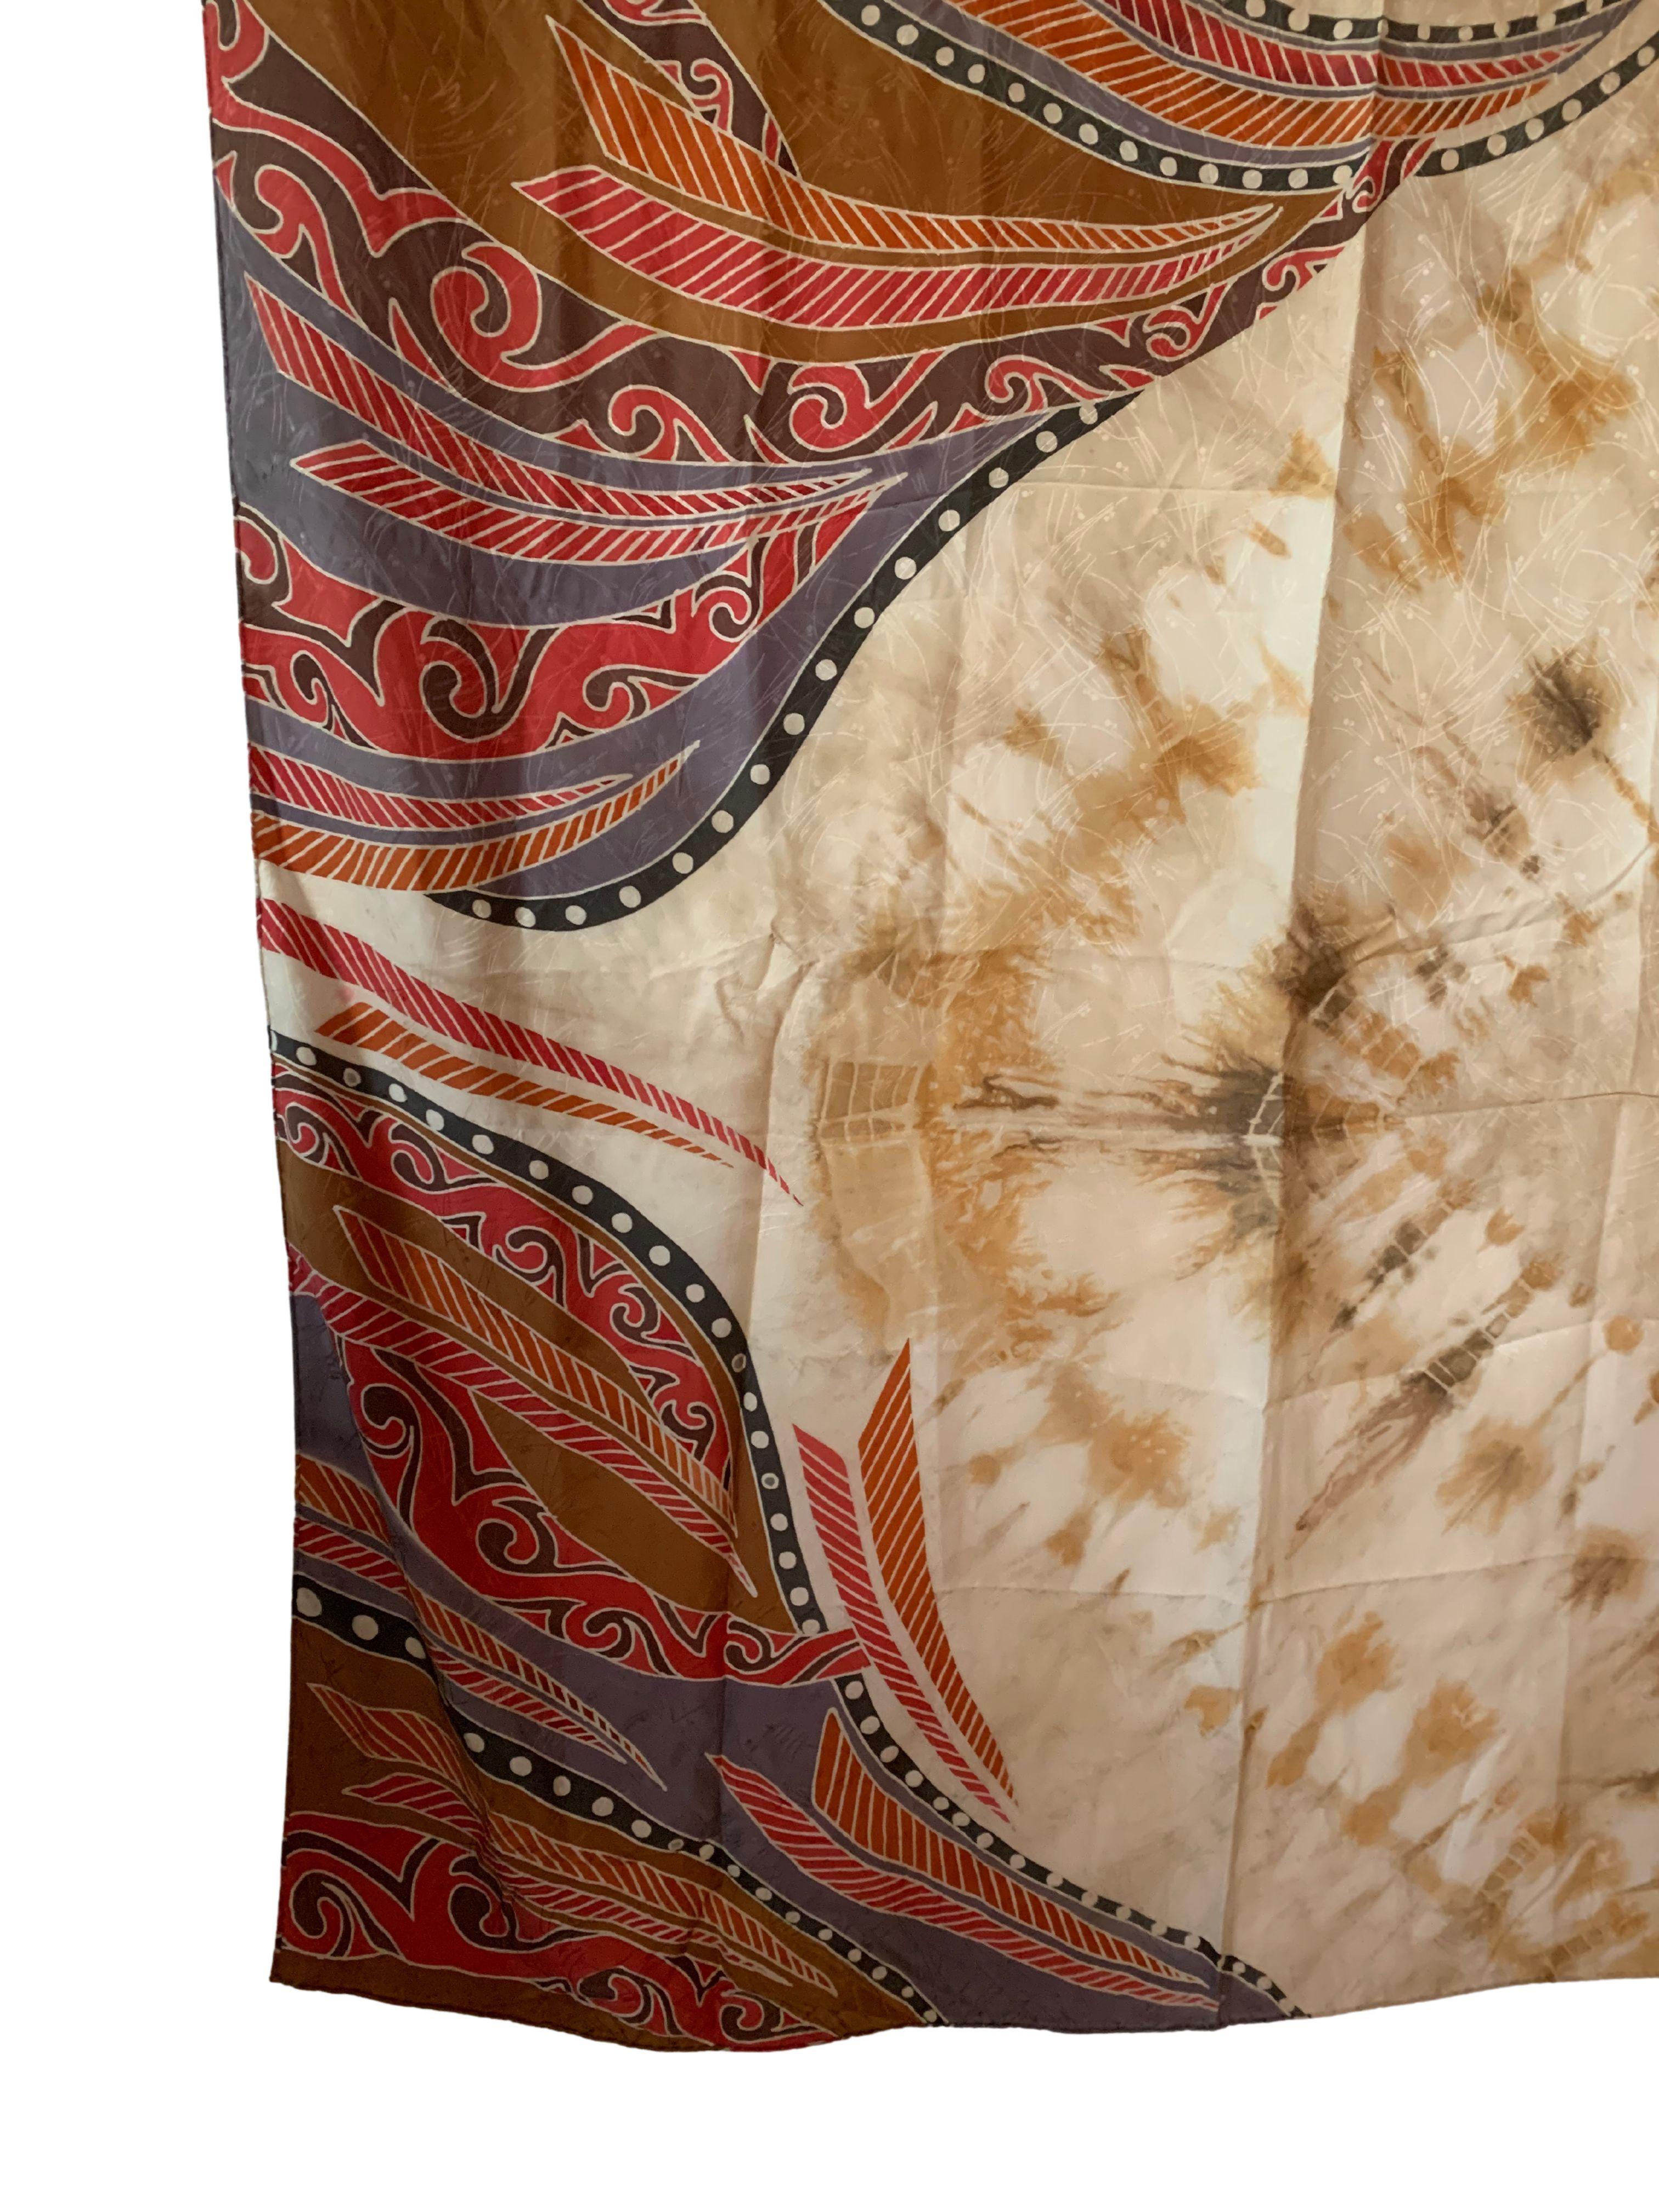 A wonderful hand-crafted shantung silk textile from Malaysia with Stunning Detailing and shades. Shantung silk is a medium-weight, plain-weave silk fabric which is woven from irregular threads and so has a rough texture. A wonderful decorative